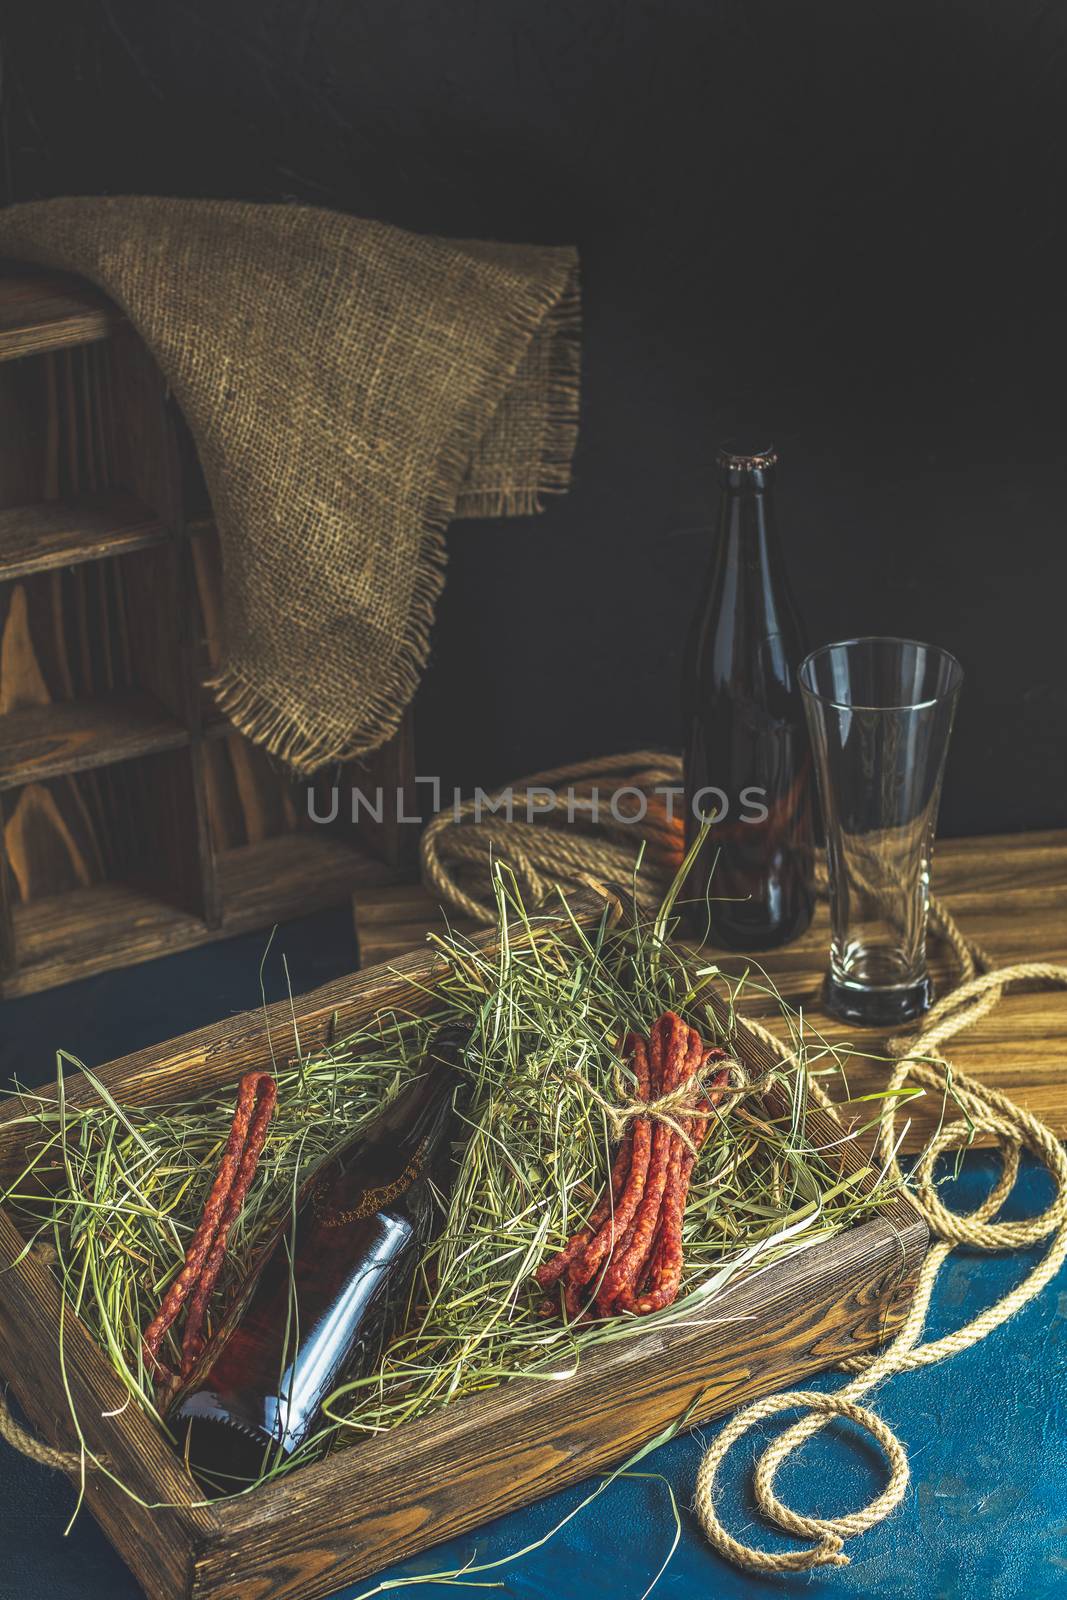 Craft beer with sausages kabanosi in the wooden box above fresh hay or dried grass beside beer bottle and drinking glass, dark rustic style.